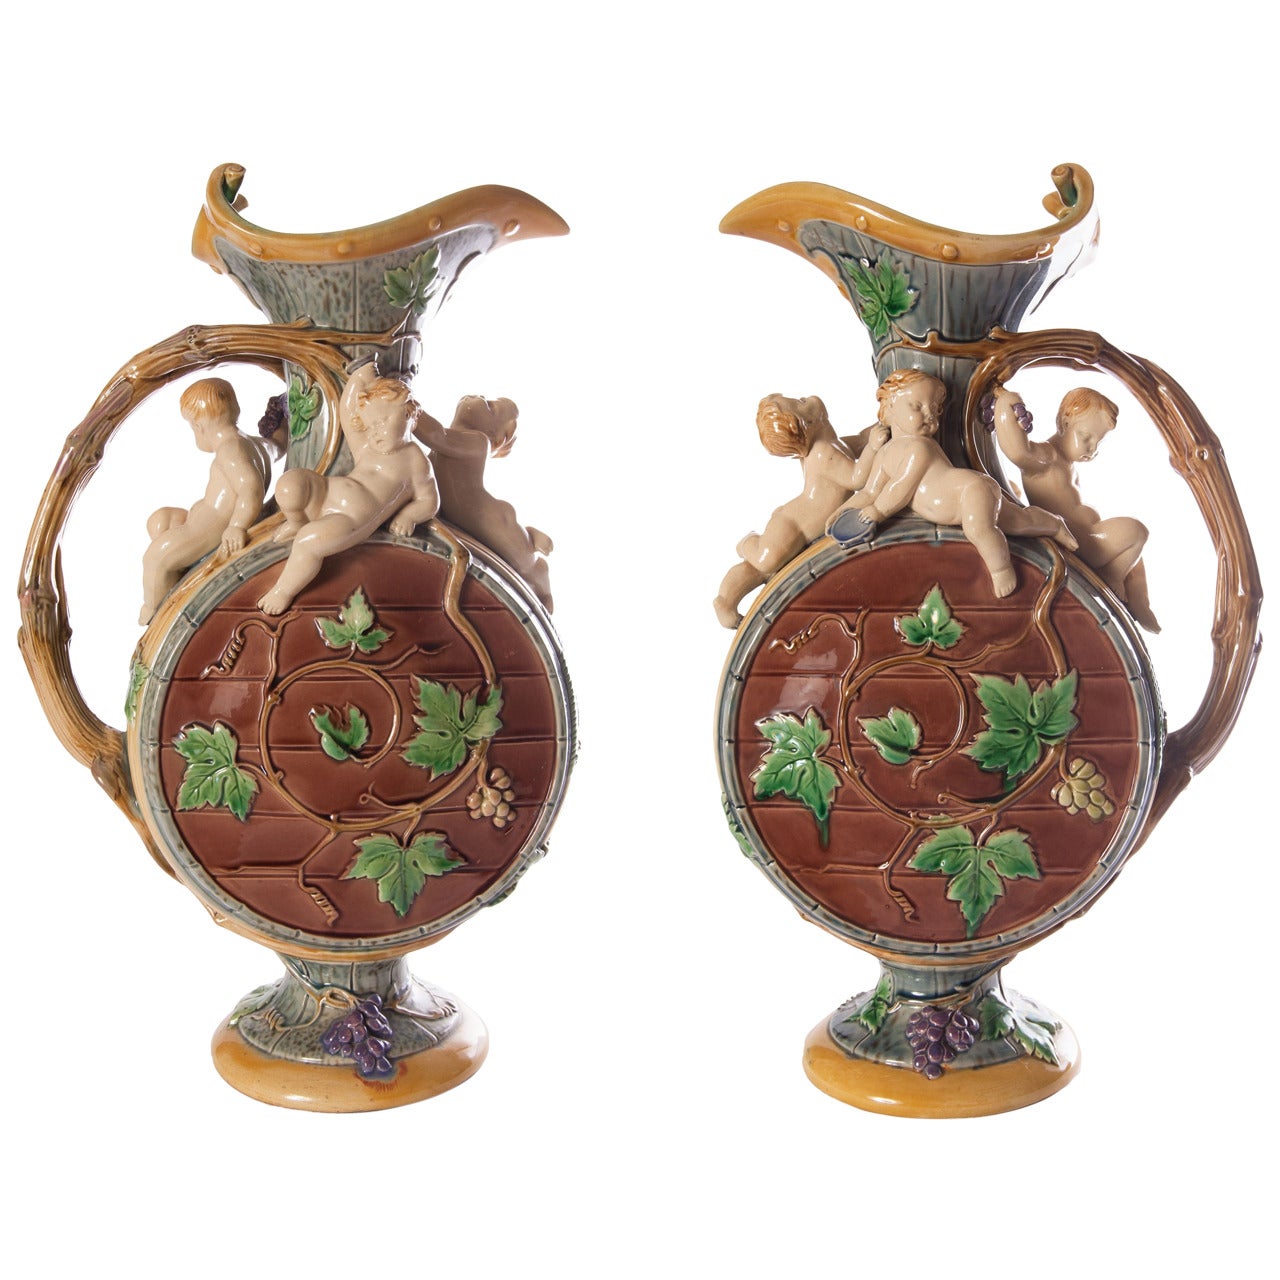 Matched pair of antique Minton majolica 'Protat' ewers